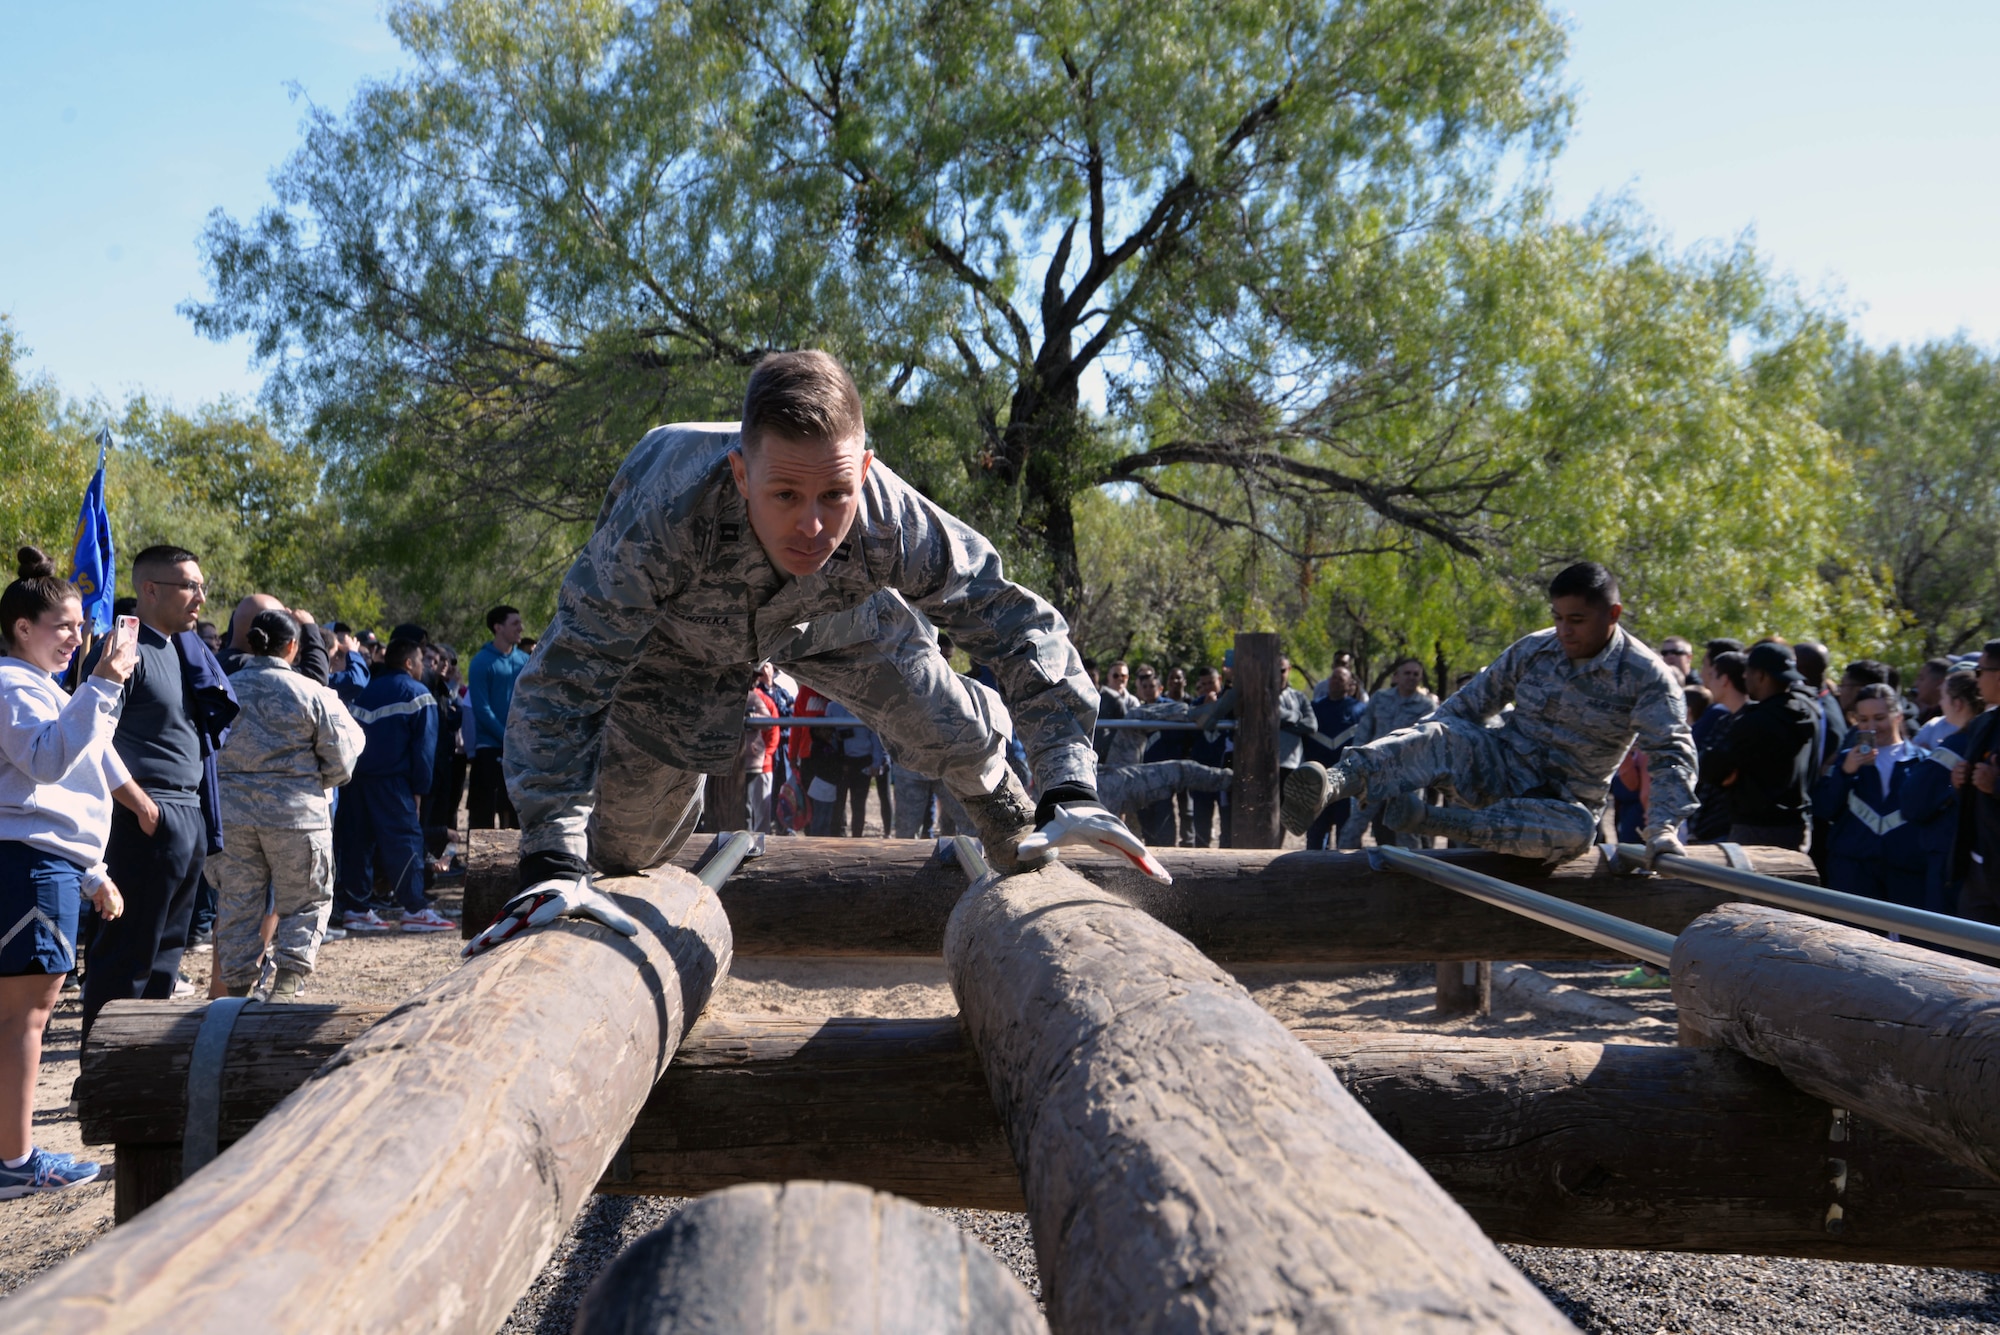 Chaplain (Capt.) Matthew A. Hanzelka, 433rd Airlift Wing chaplain, crawls across an obstacle during a team-building exercise at the 433rd AW Resilience Tactical Pause at the Air Force Basic Military Training’s Basic Expeditionary Airman Skills Training site at the Medina Annex, Joint Base San Antonio-Lackland, Texas Nov. 3, 2019.